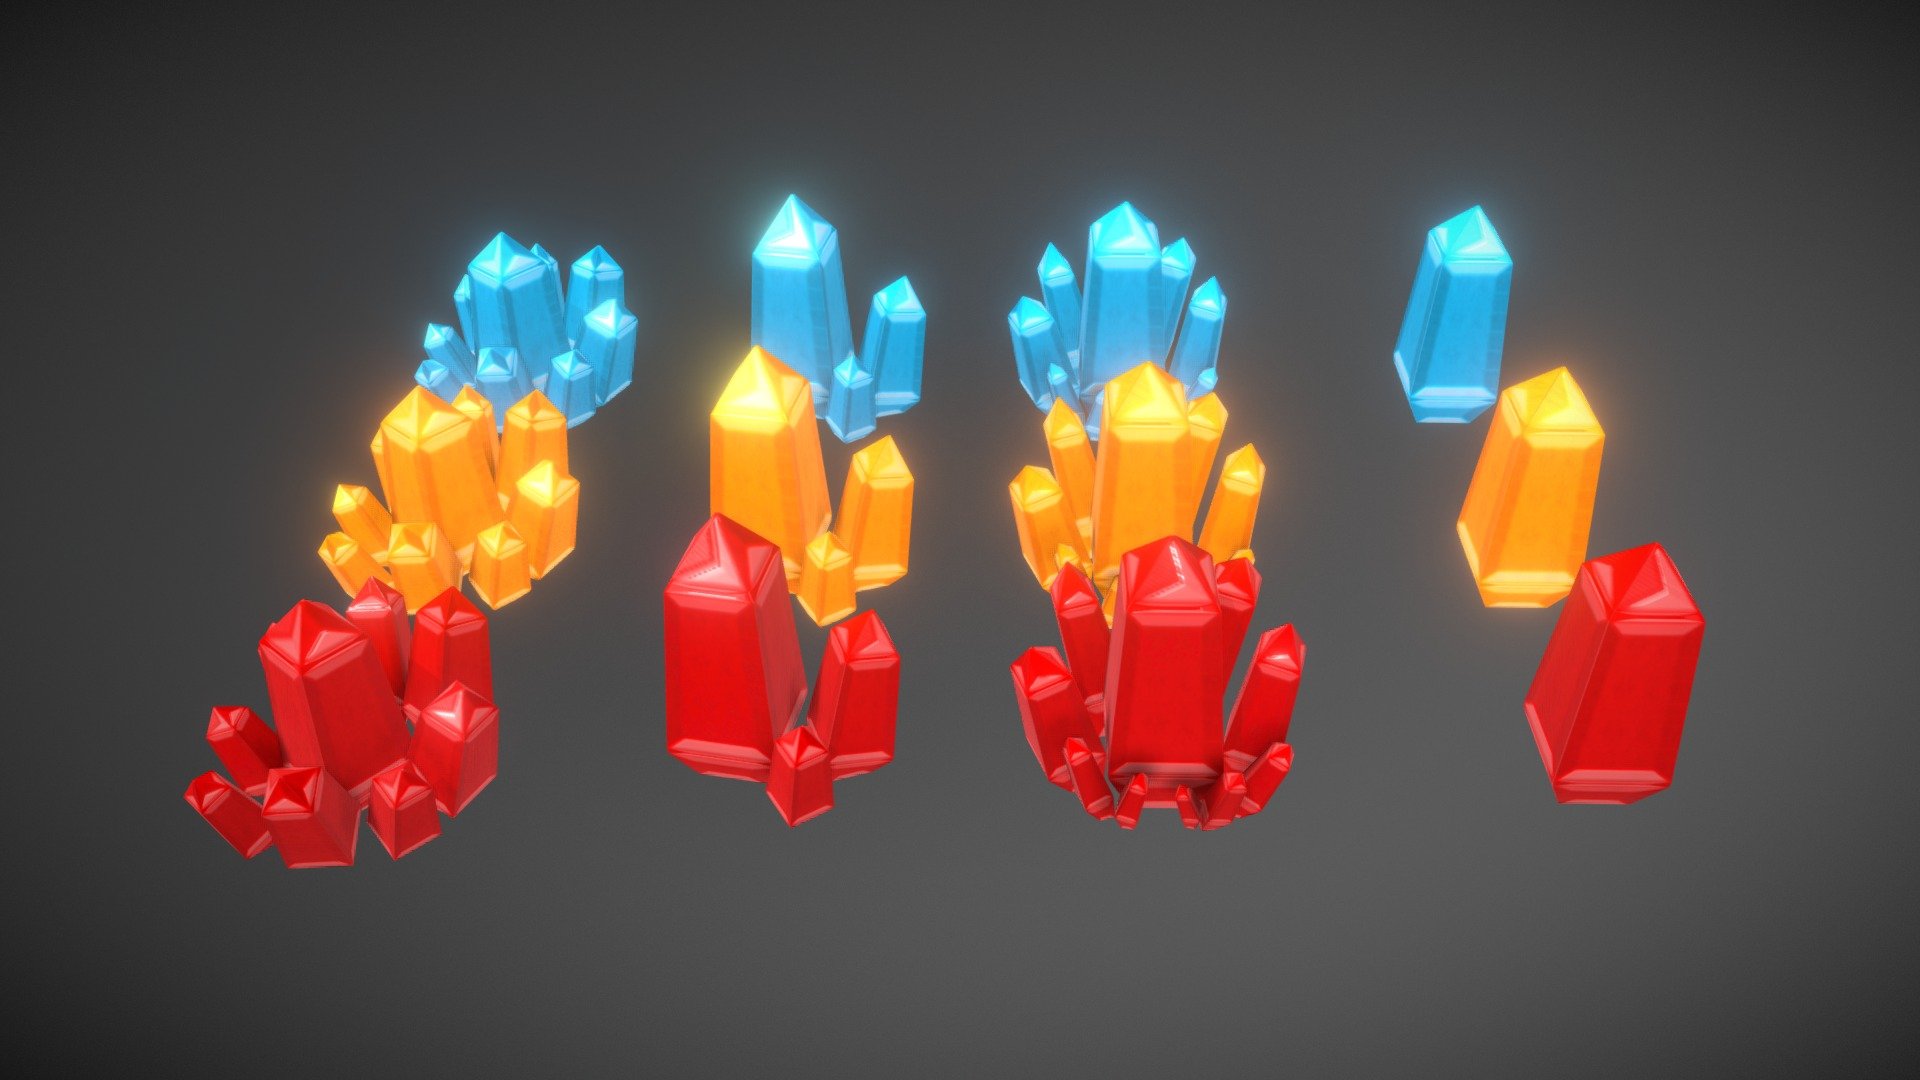 (concept art) 3 colors Low poly crystal model for my beloved gamers and game developers.feel free to use it on your game .
3D models available for download. ready for , games and VR / AR projects. Available in any file format including FBX, OBJ, MAX, 3DS, C4D. recommended for game projects (unwrapped) texture ,normal map.
Enjoy! - Low Poly Crystal (pack) - Buy Royalty Free 3D model by Pedram Ashoori (@pedramashoori) 3d model